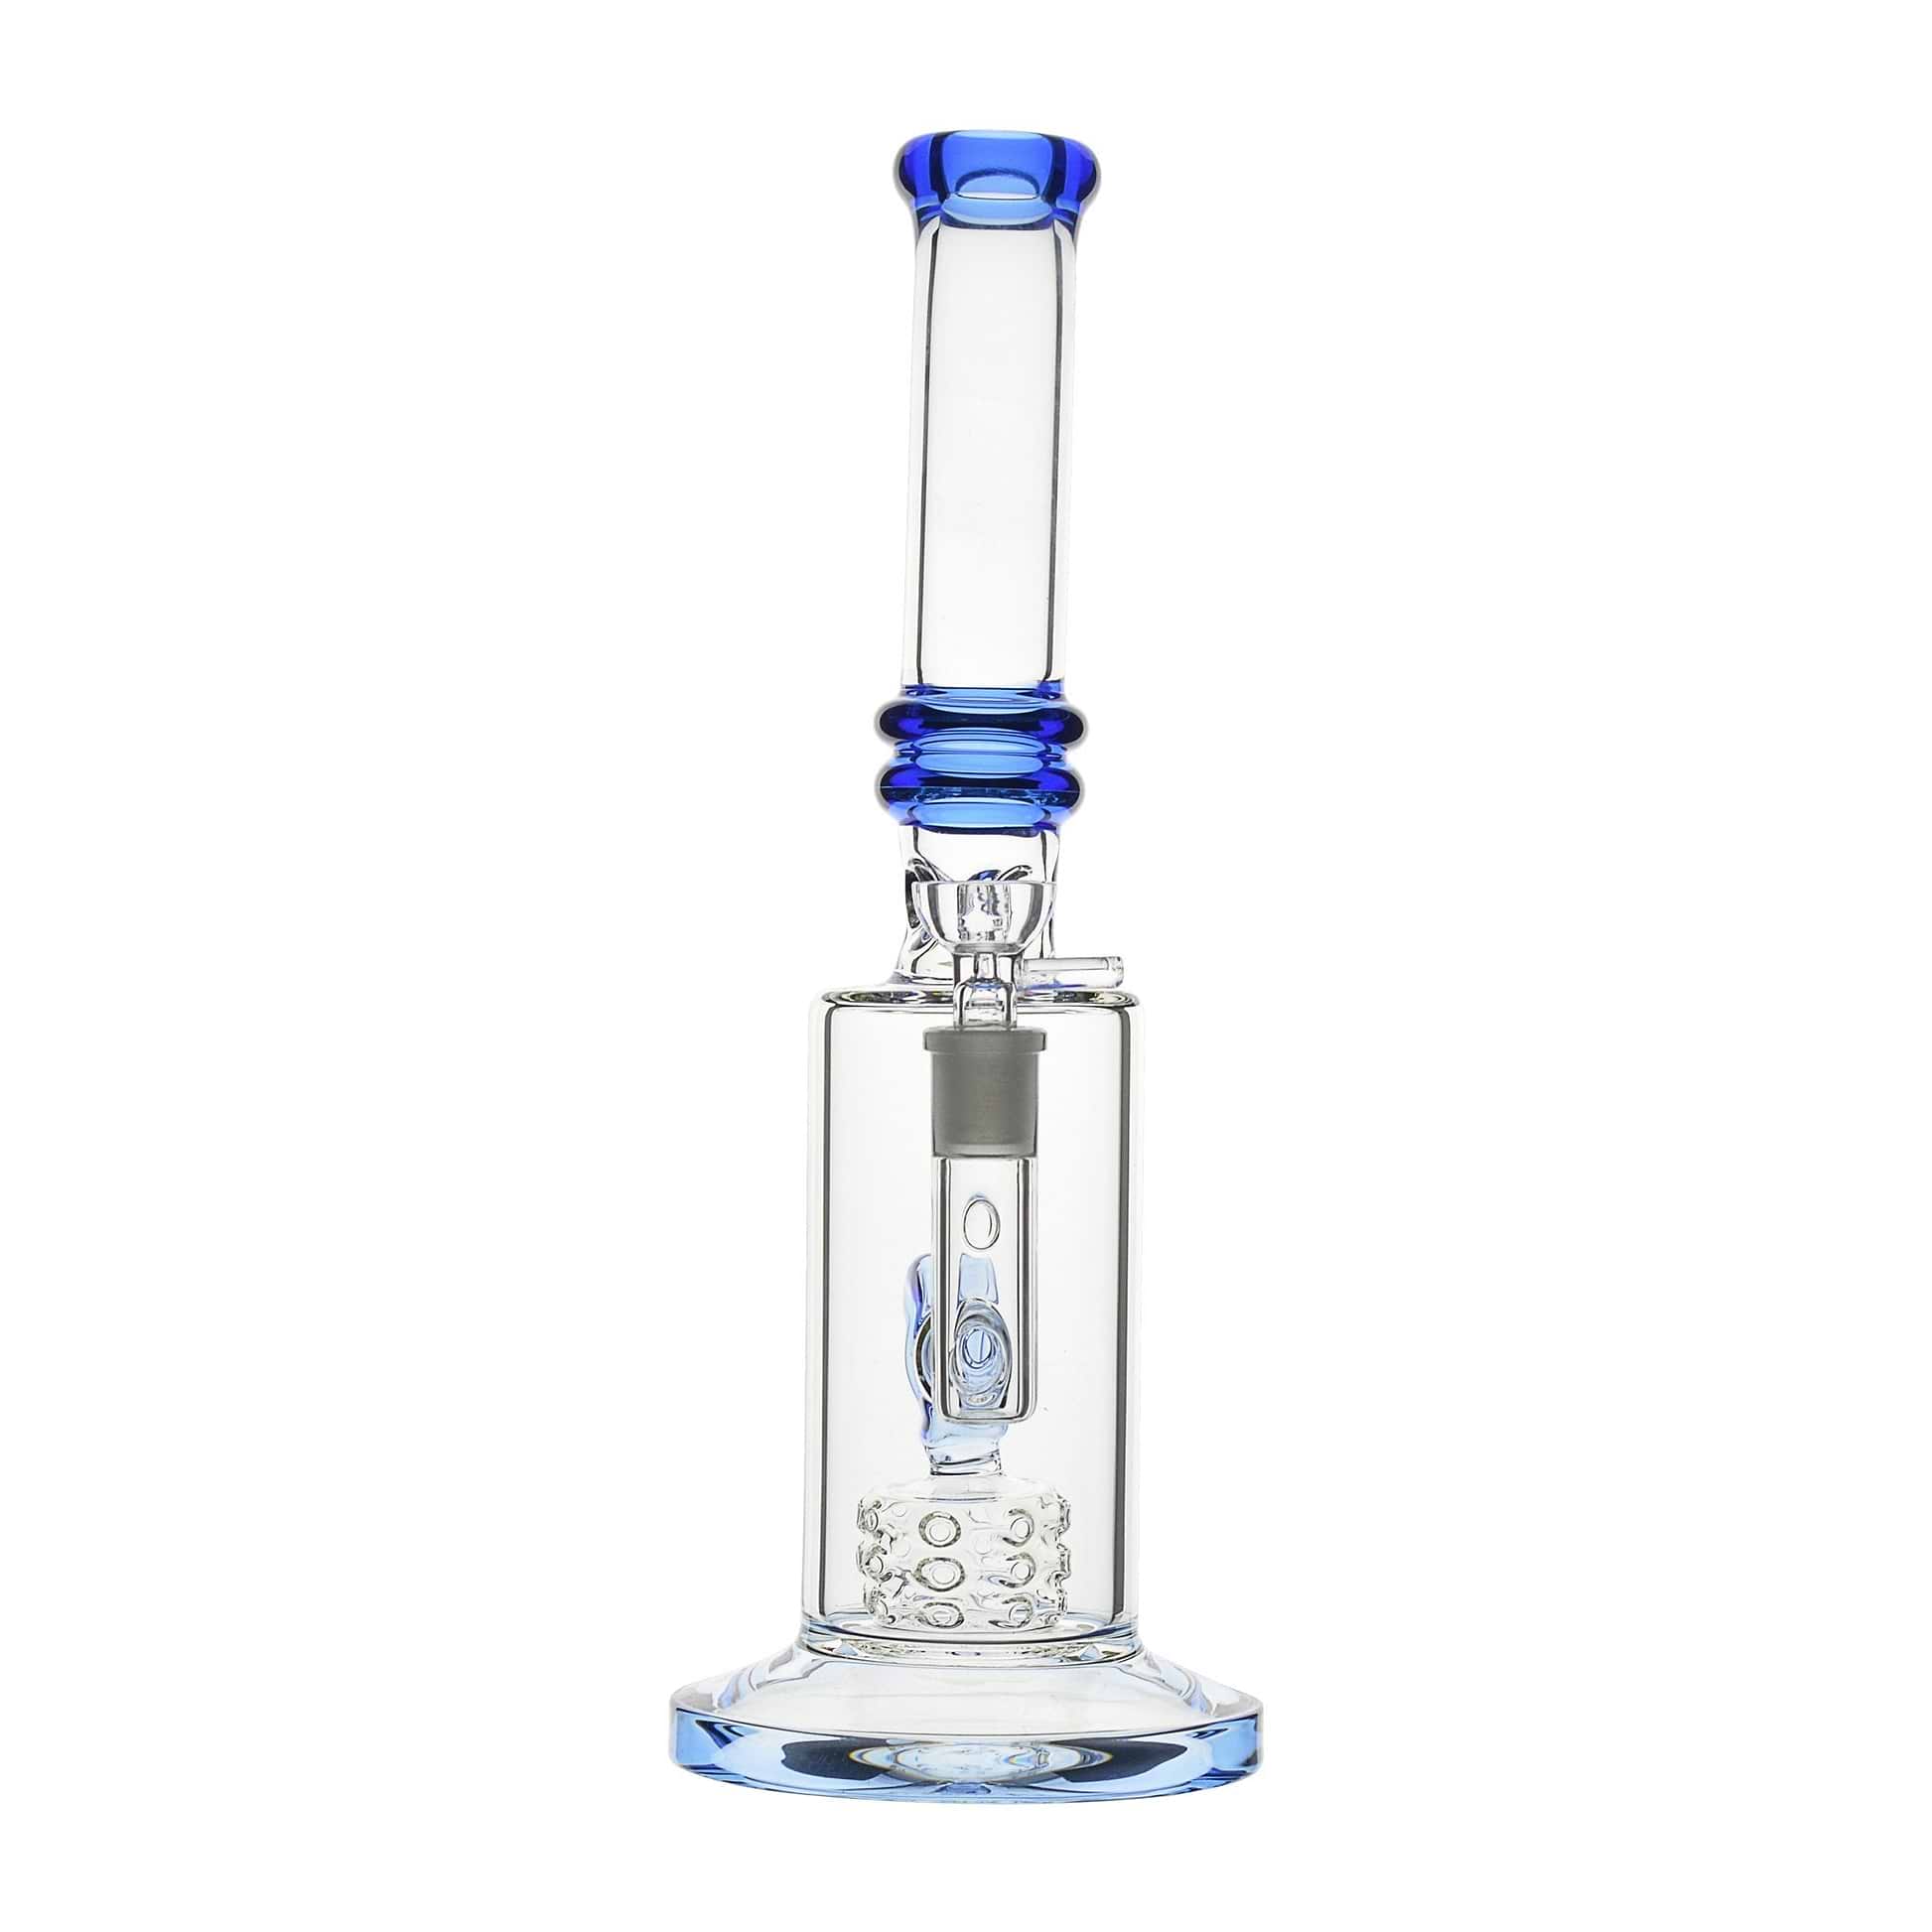 Blue Clear glass bong smoking device built-in catcher, splash guards, bowl iceberg-inspired design laboratory microscope look